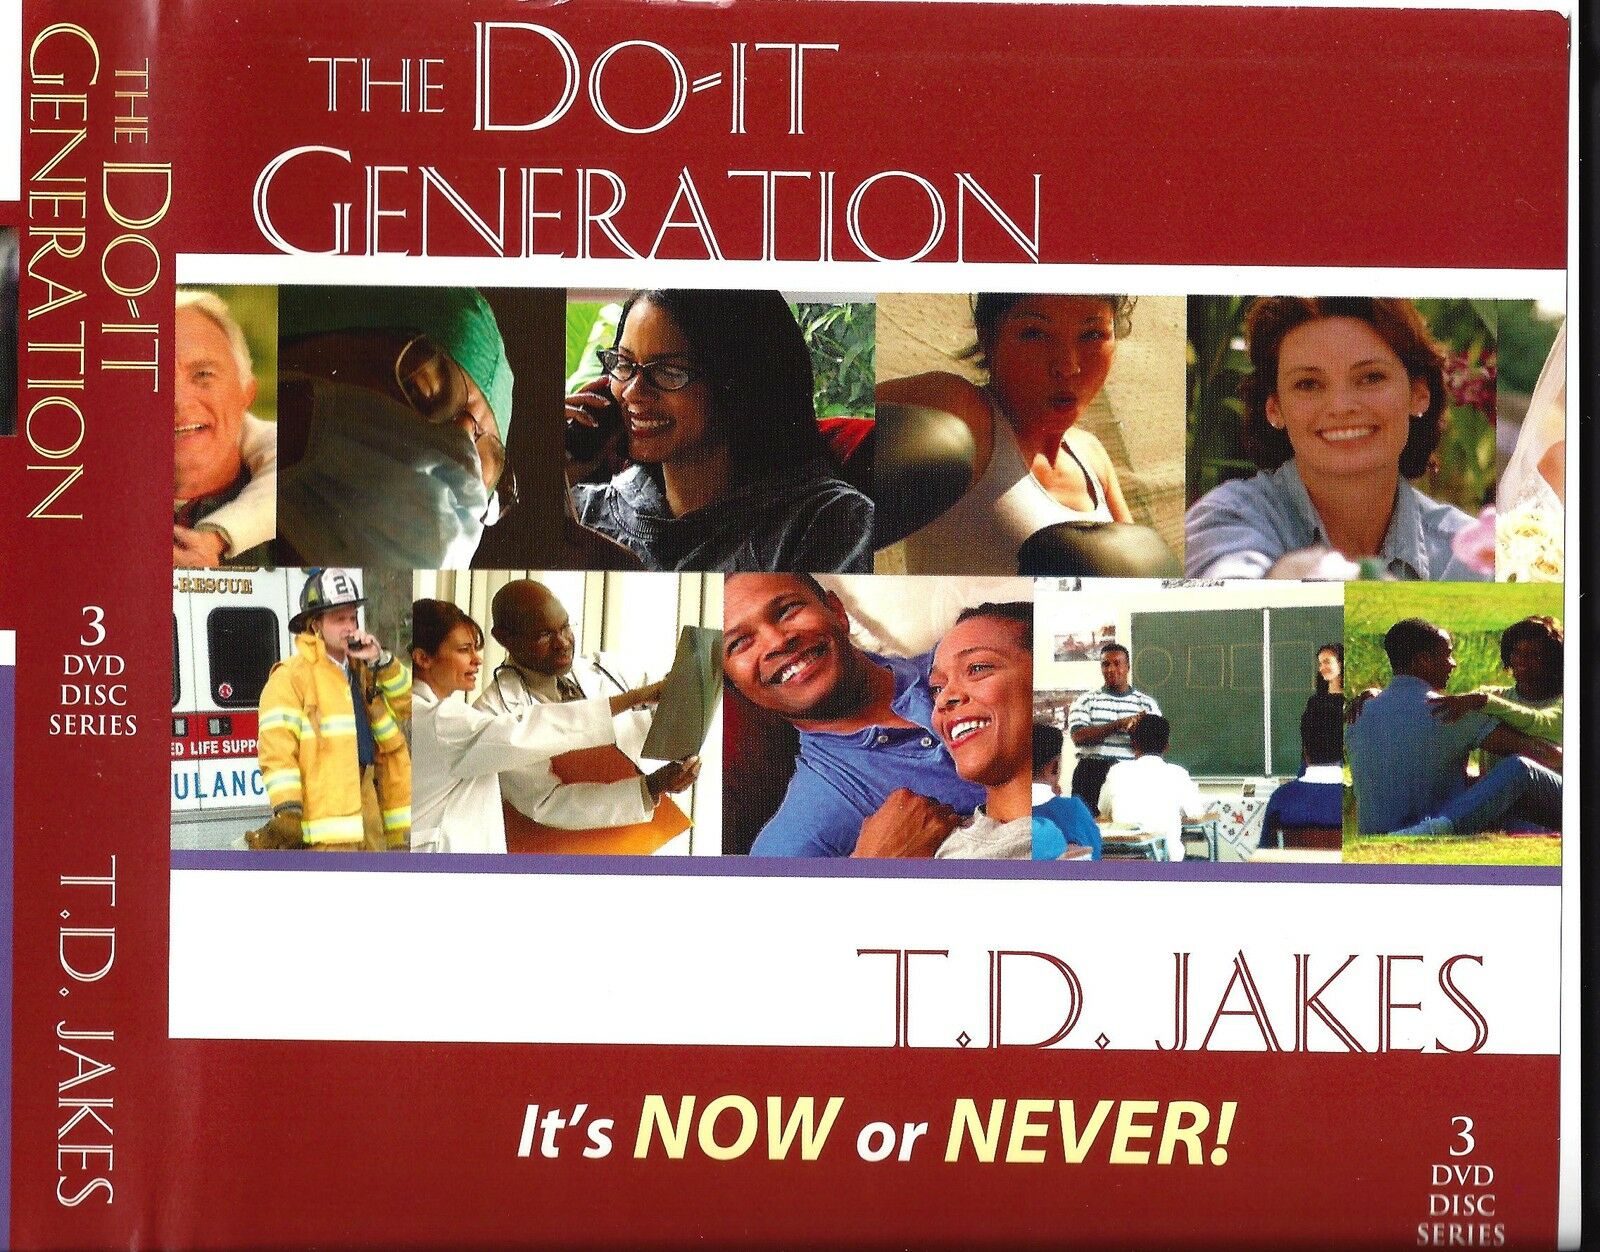 The Do-It Generation (3DVD) - T D Jakes